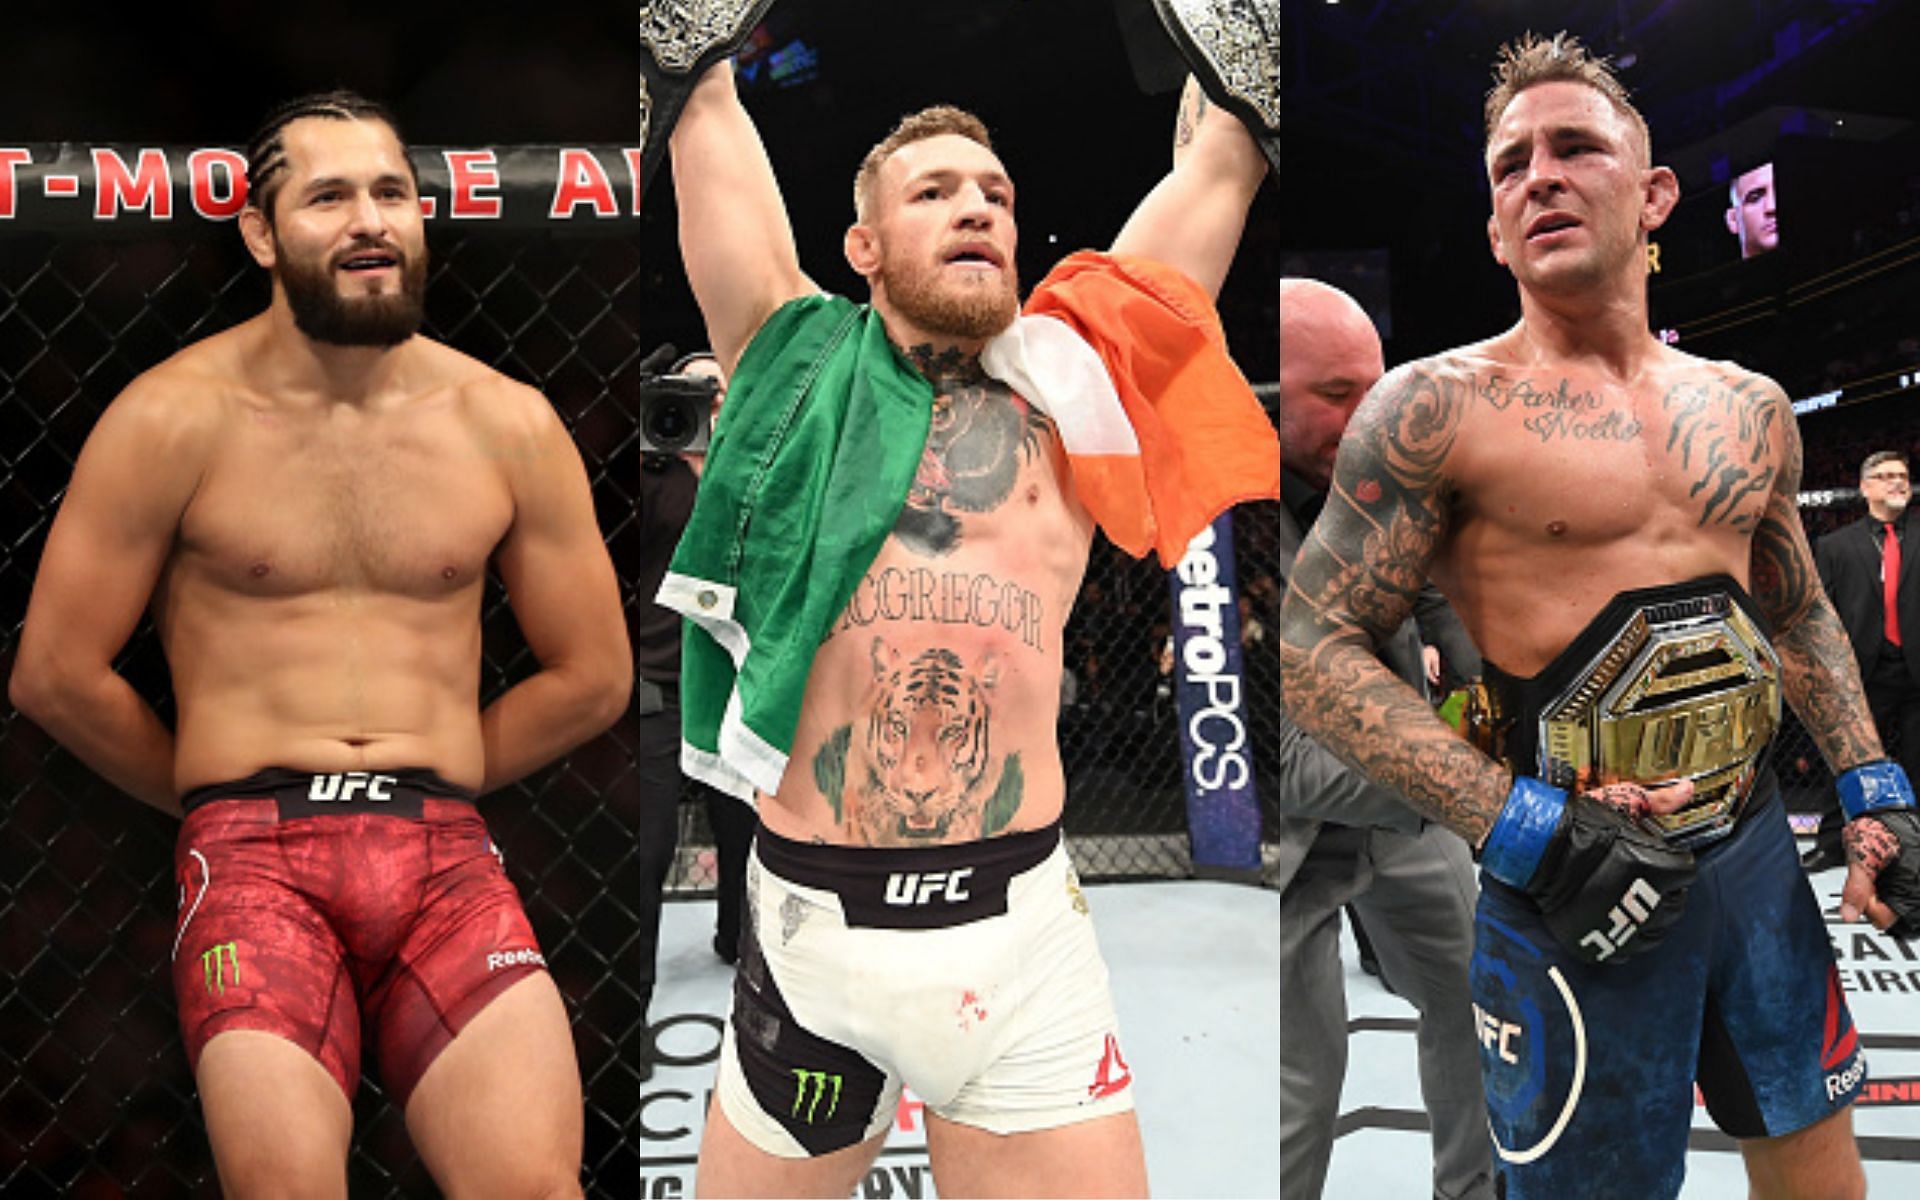 Jorge Masvidal (left), Conor McGregor (middle), and Dustin Poirier (right) (Images via Getty)